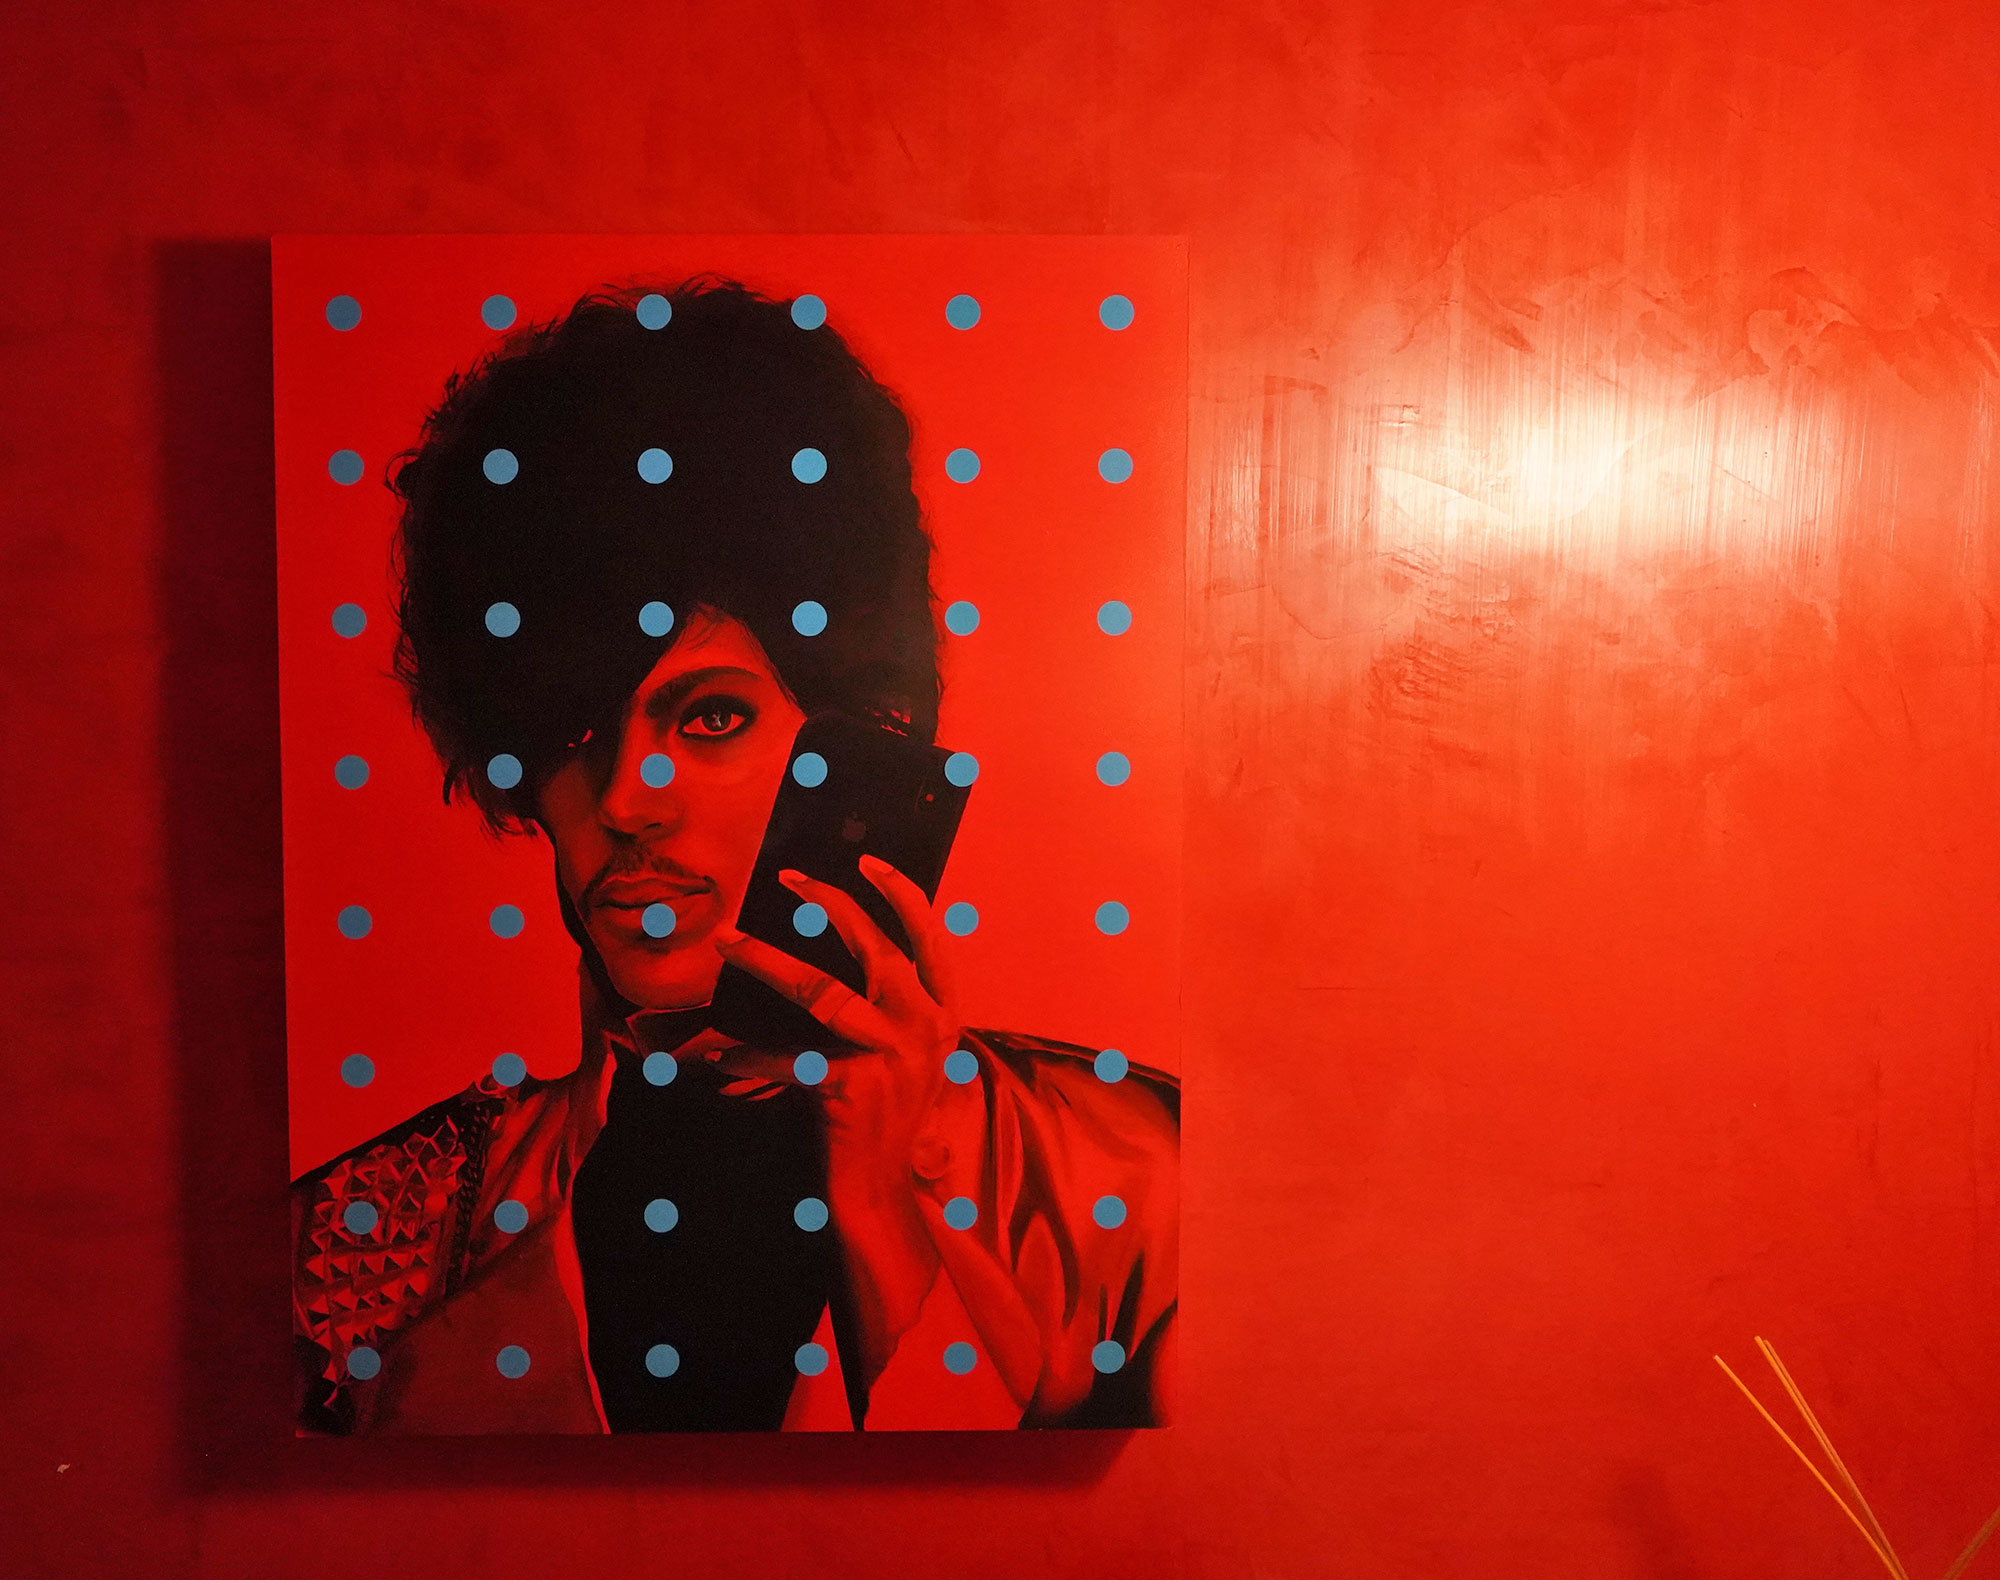 A Prince mural in at the Dallas Virgin Hotel.